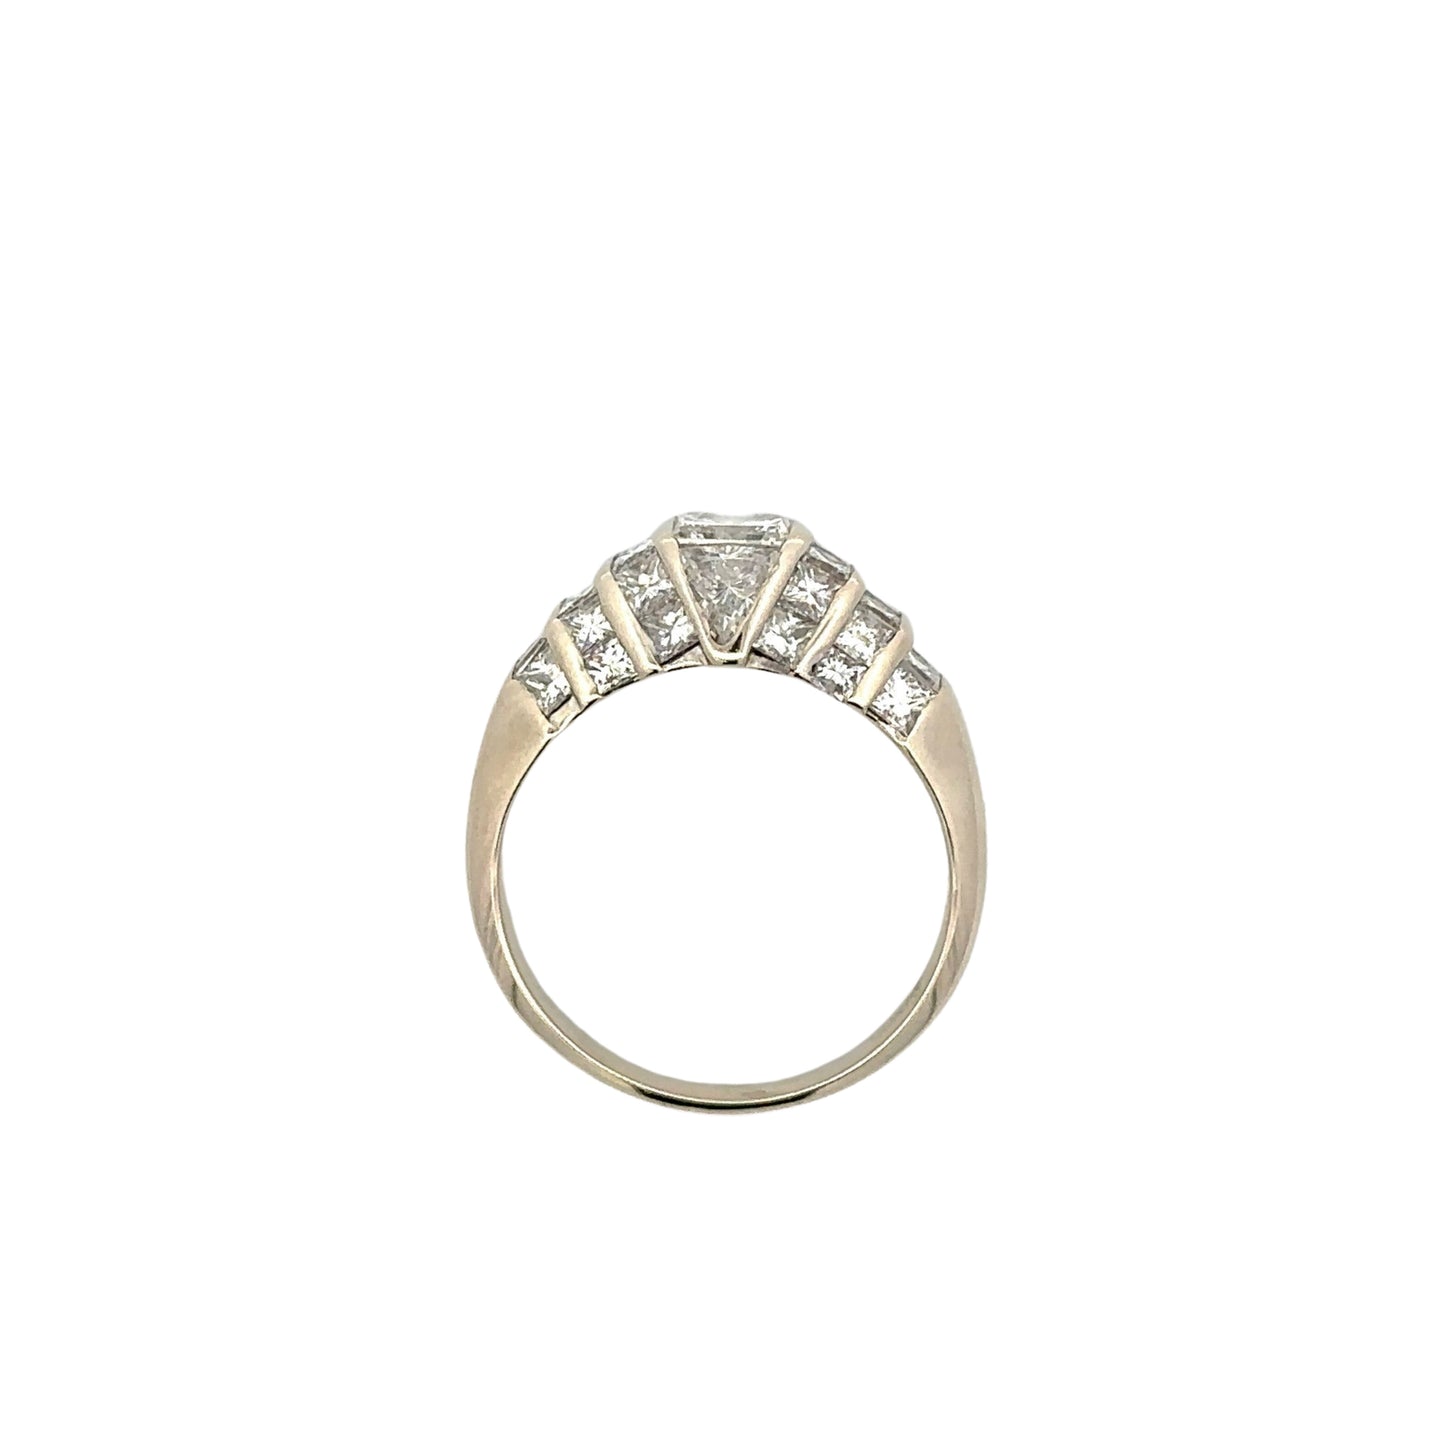 top of white gold ring with 10 small princess-cut diamonds on the side